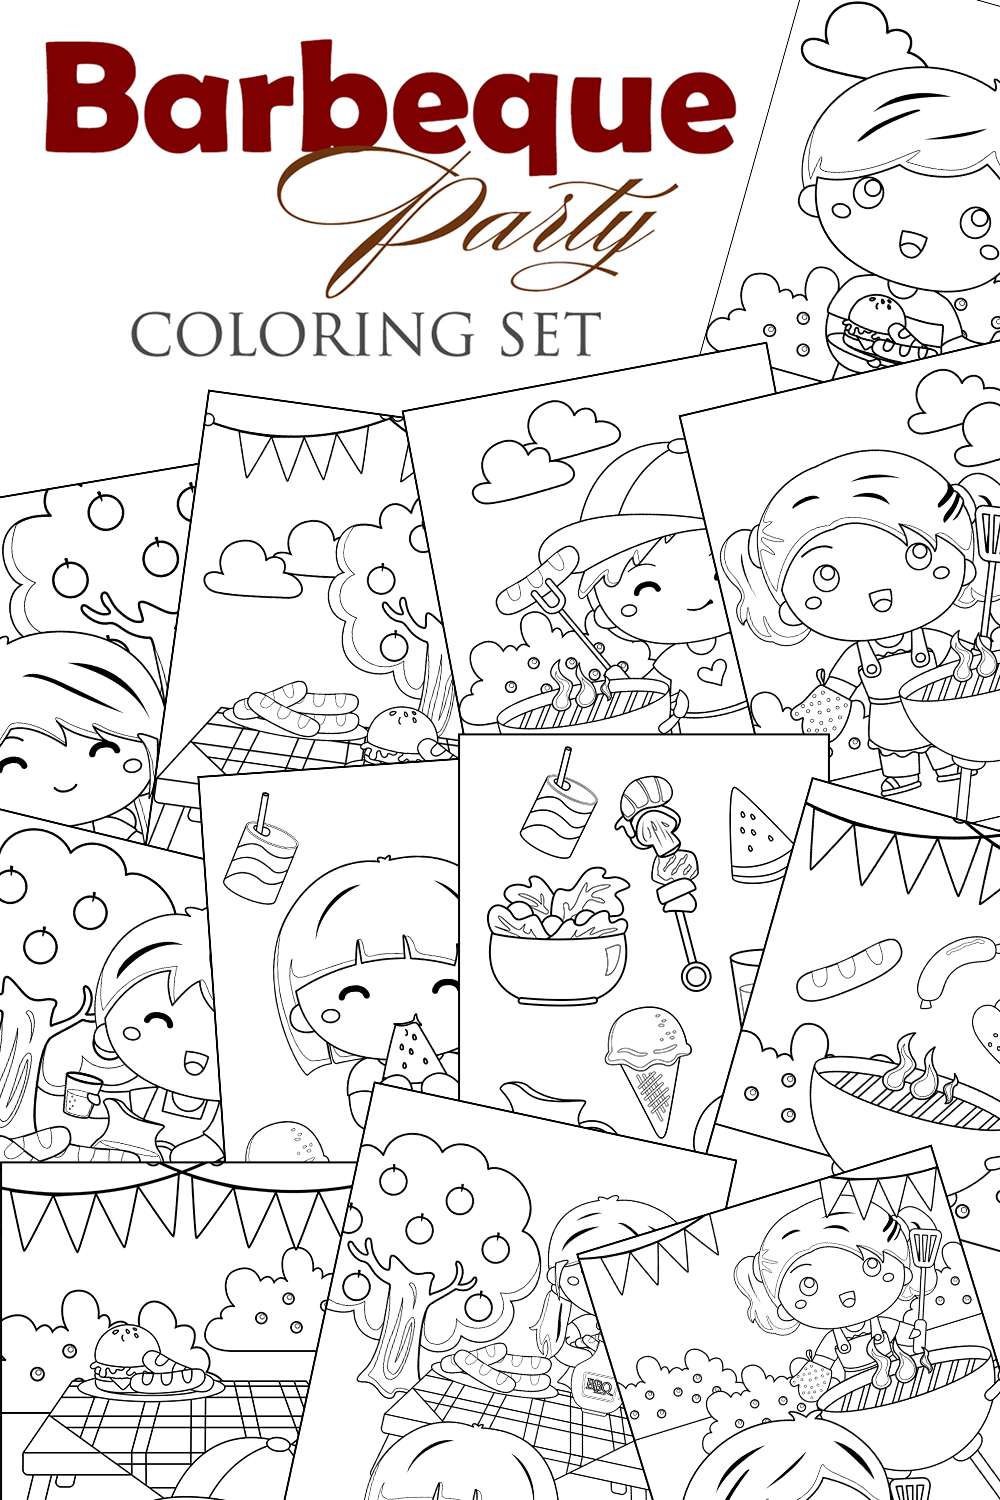 Kids Making Outdoor Barbeque BBQ Food Party Activity Coloring Set pinterest preview image.